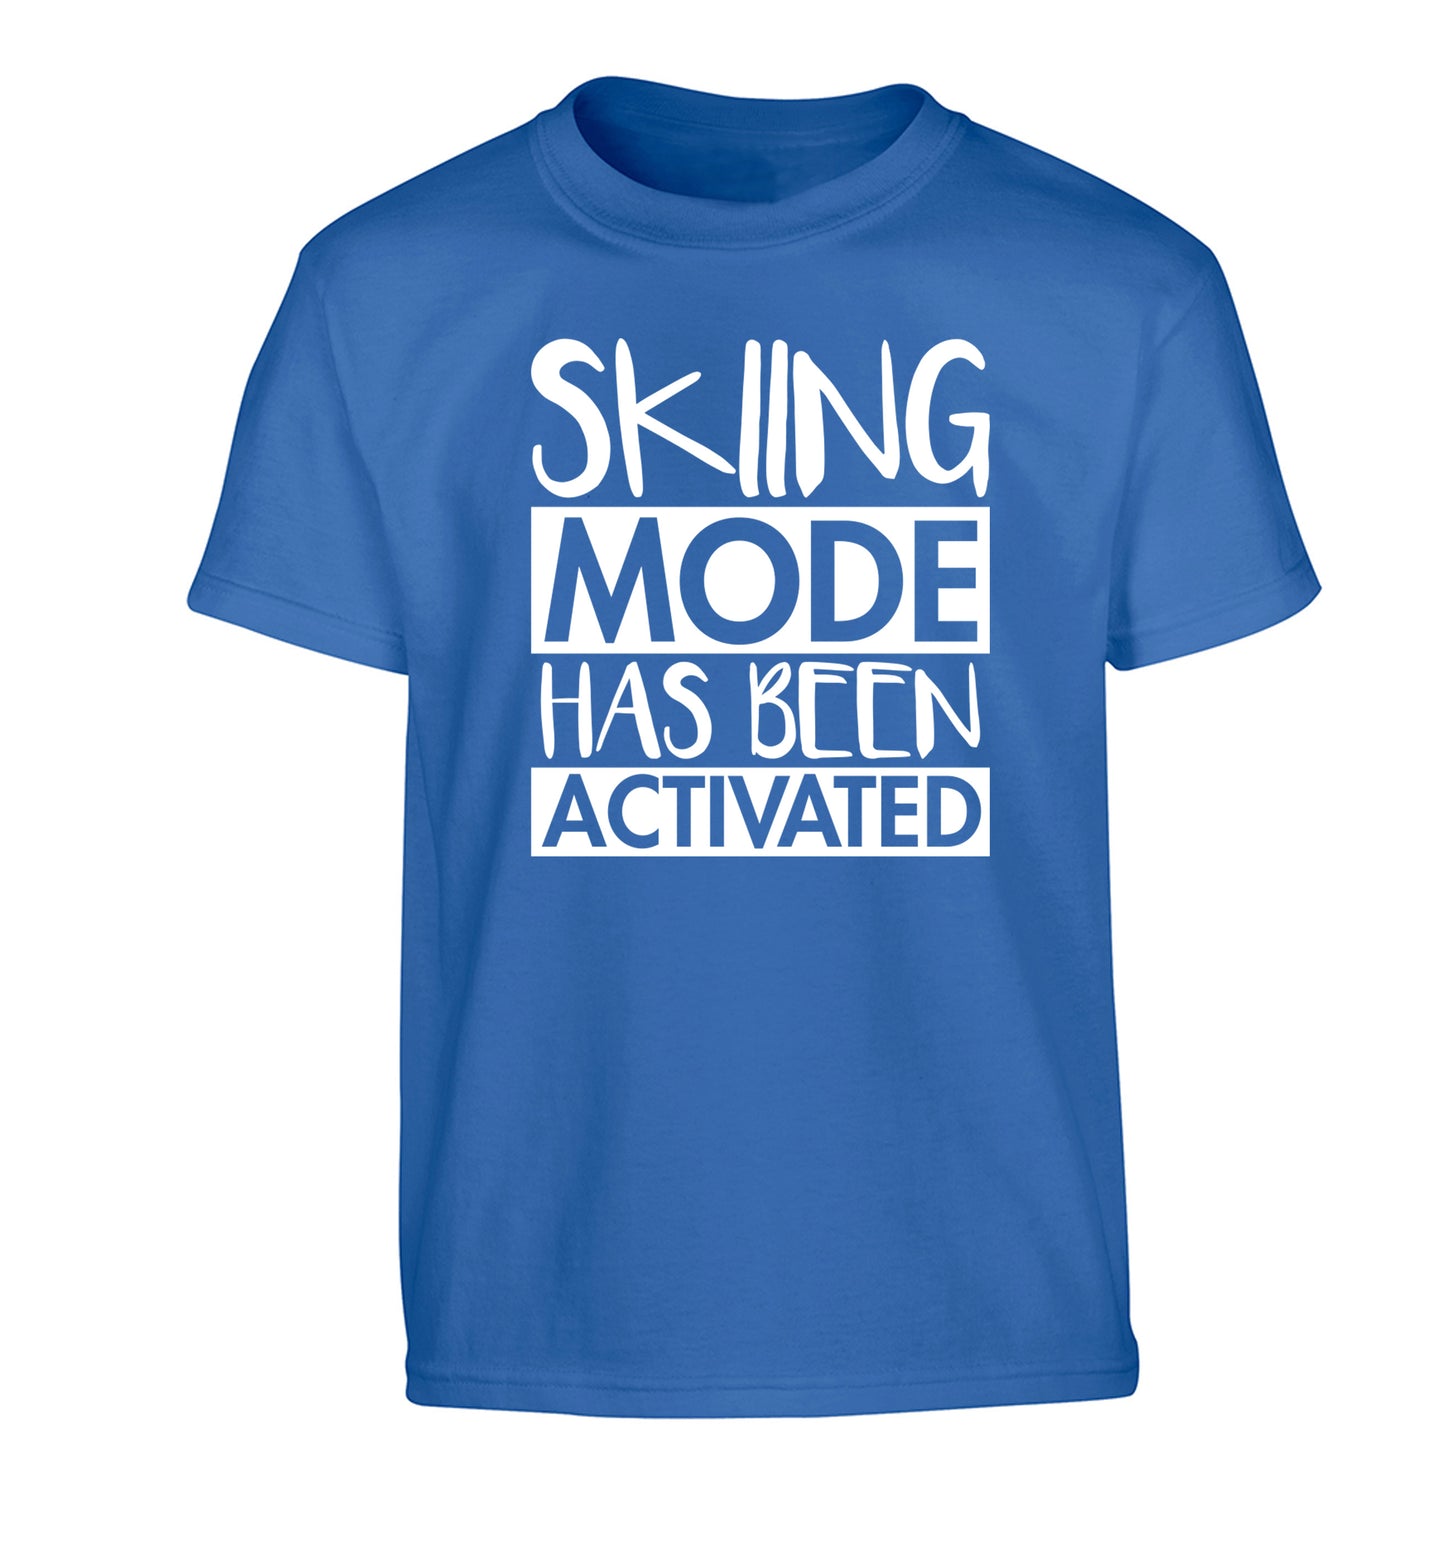 Skiing mode activated Children's blue Tshirt 12-14 Years